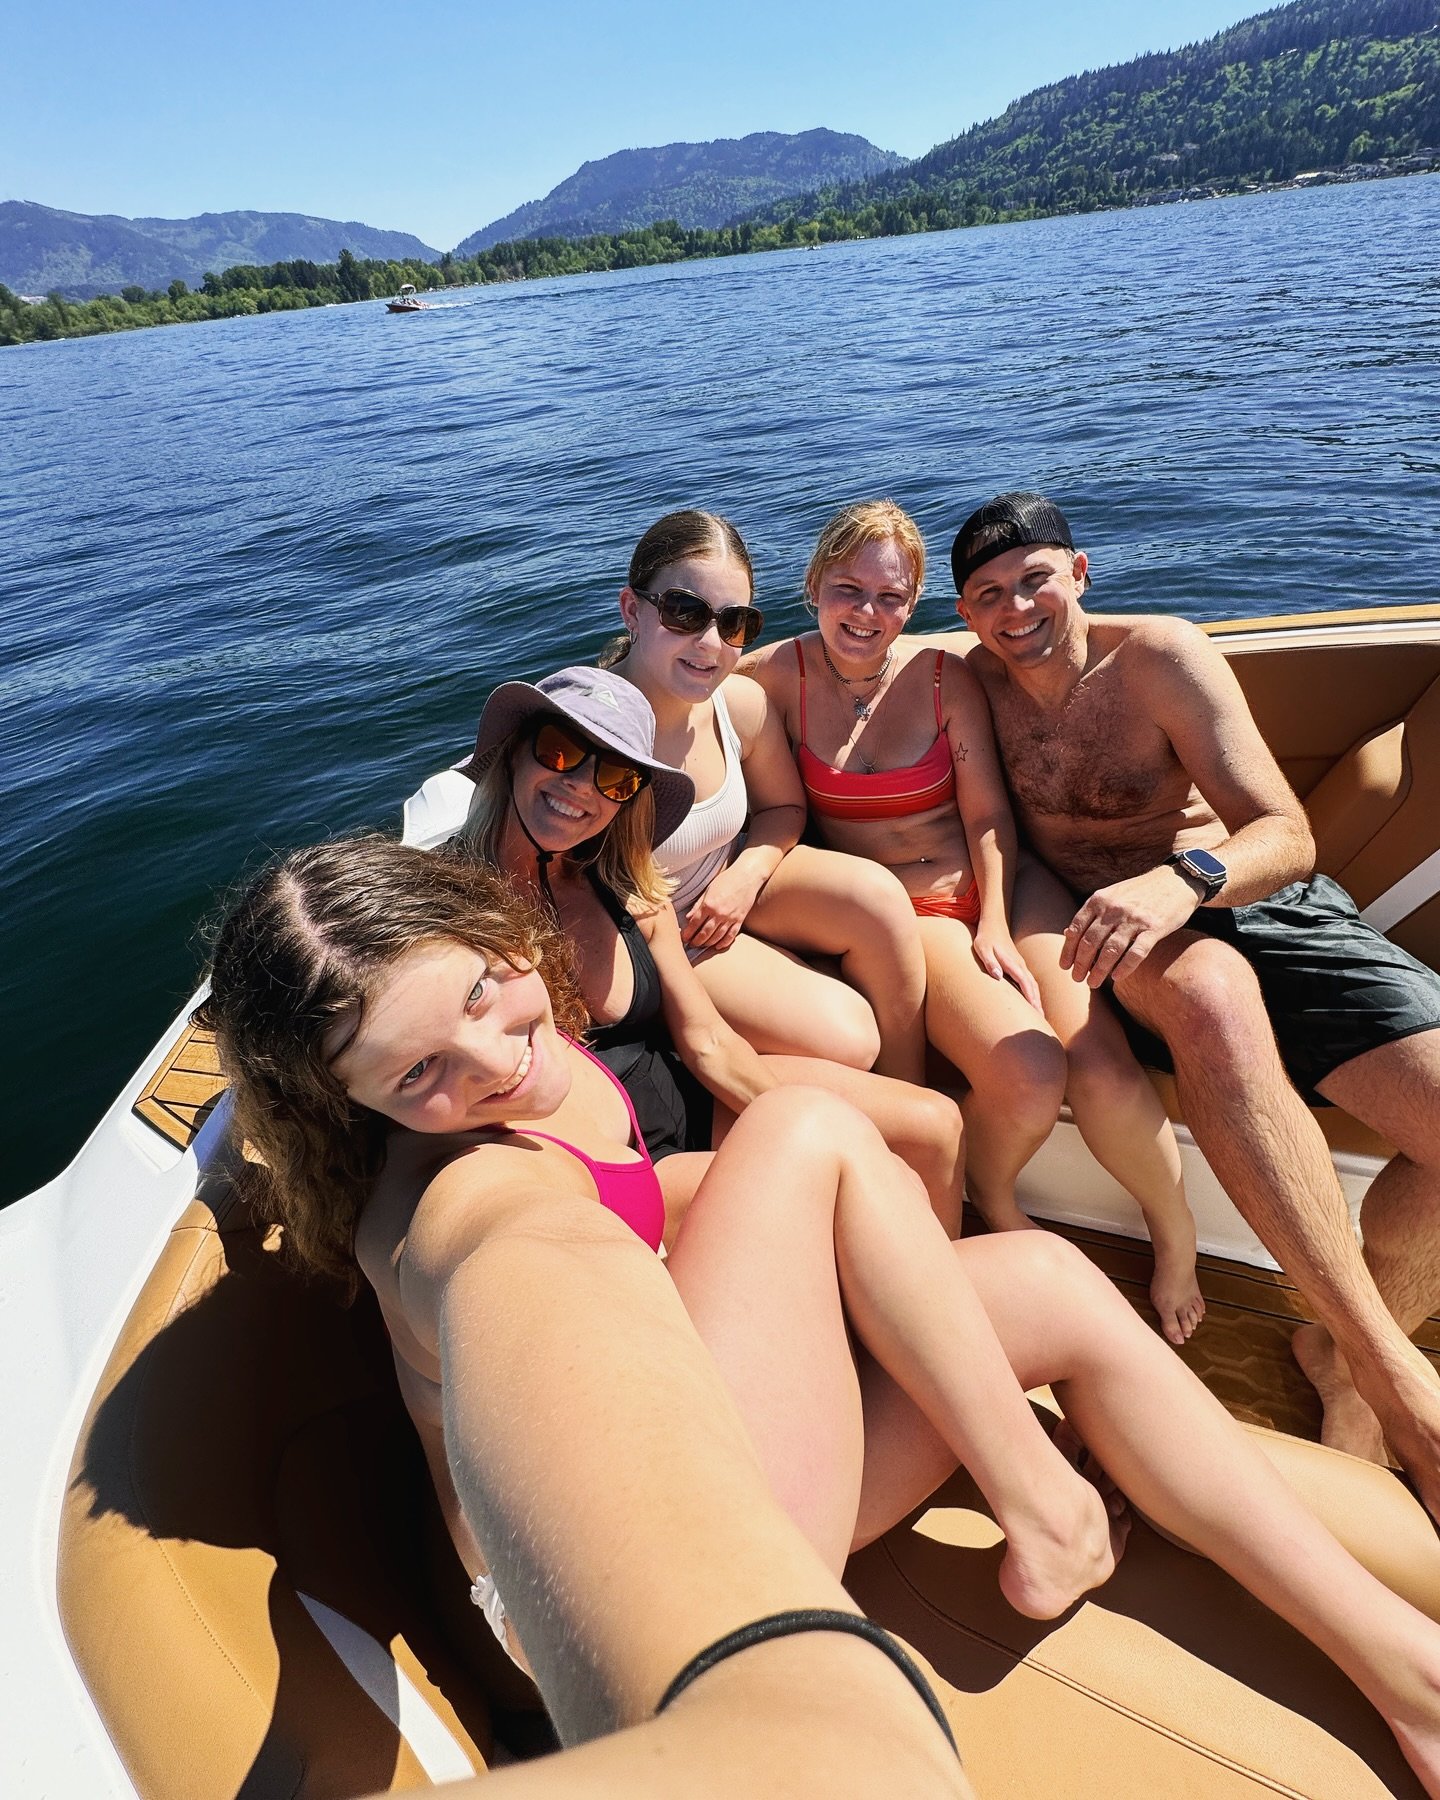 Alli came home for Mother&rsquo;s Day weekend and we got to take a quick family boat trip! First of many Dandeneau lake adventures to come. The weather cooperated and Alli even has a little Seattle suntan to take back to Eugene with her. ☀️☀️☀️